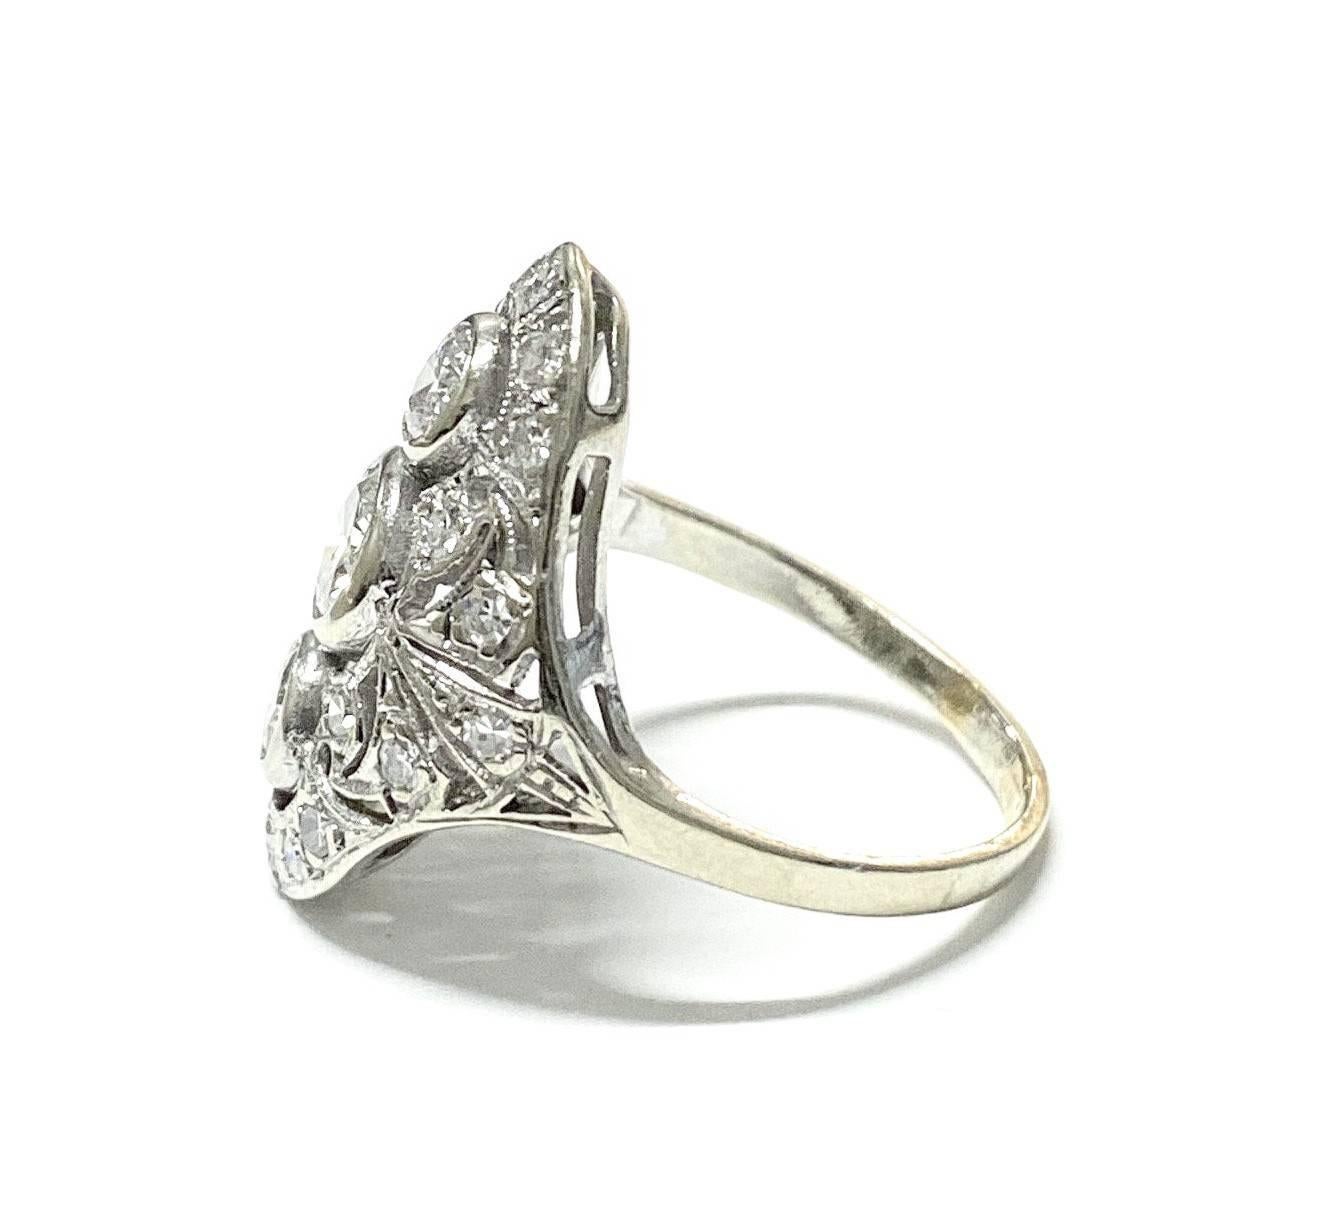 For sale we have a Navette style Art Deco Cocktail Ring. This ring contains 1.25 CTW of single cut Diamonds set in 14K White Gold Filigree. This piece is currently a finger size 7.25 but we do offer sizing upon request (fees may apply). This ring is